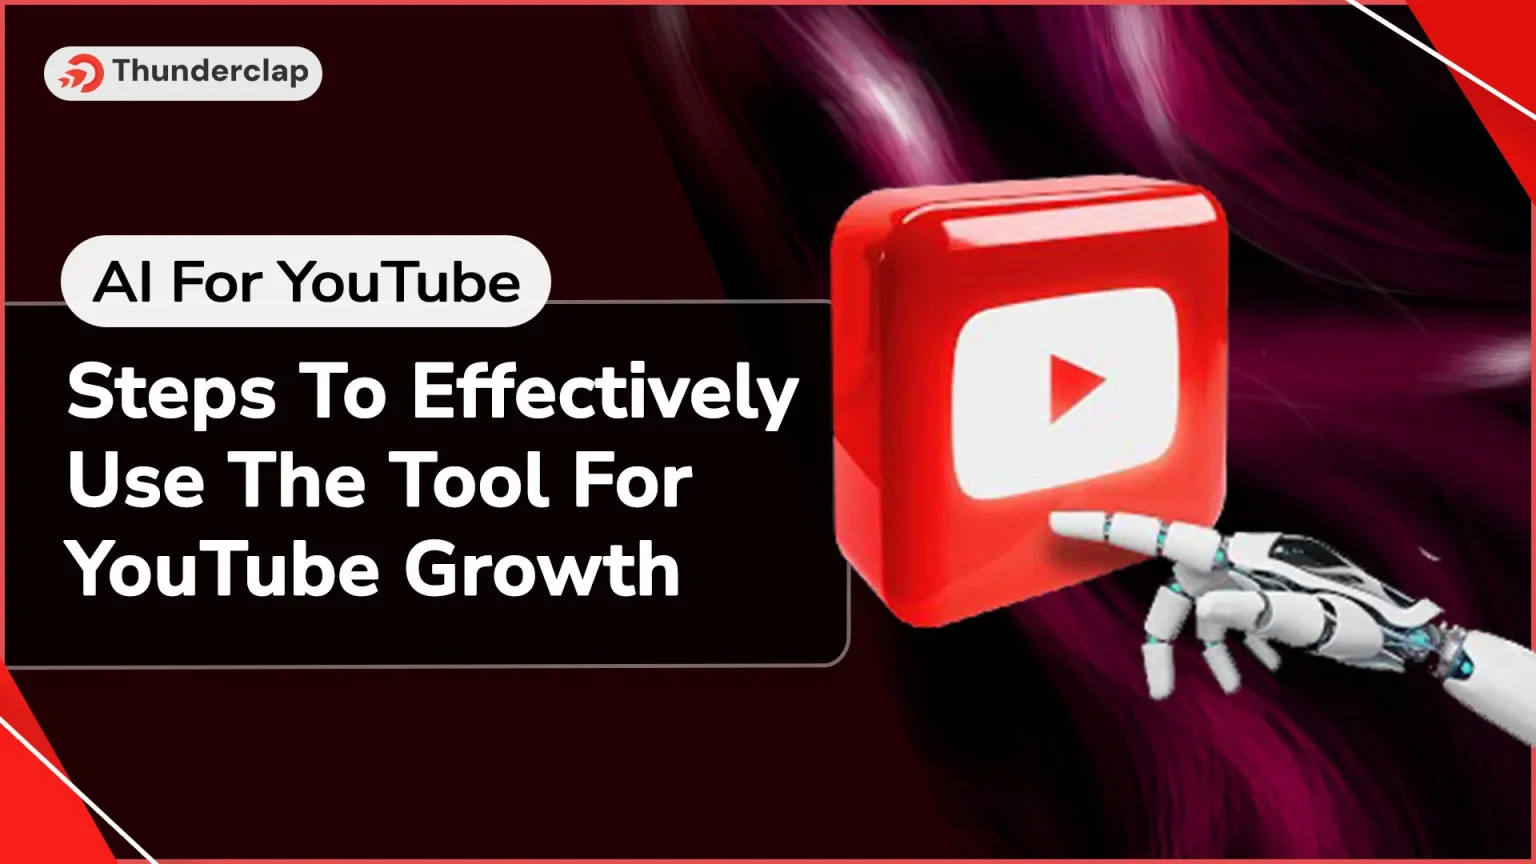 AI For YouTube: Steps To Effectively Use The Tool For YouTube Growth